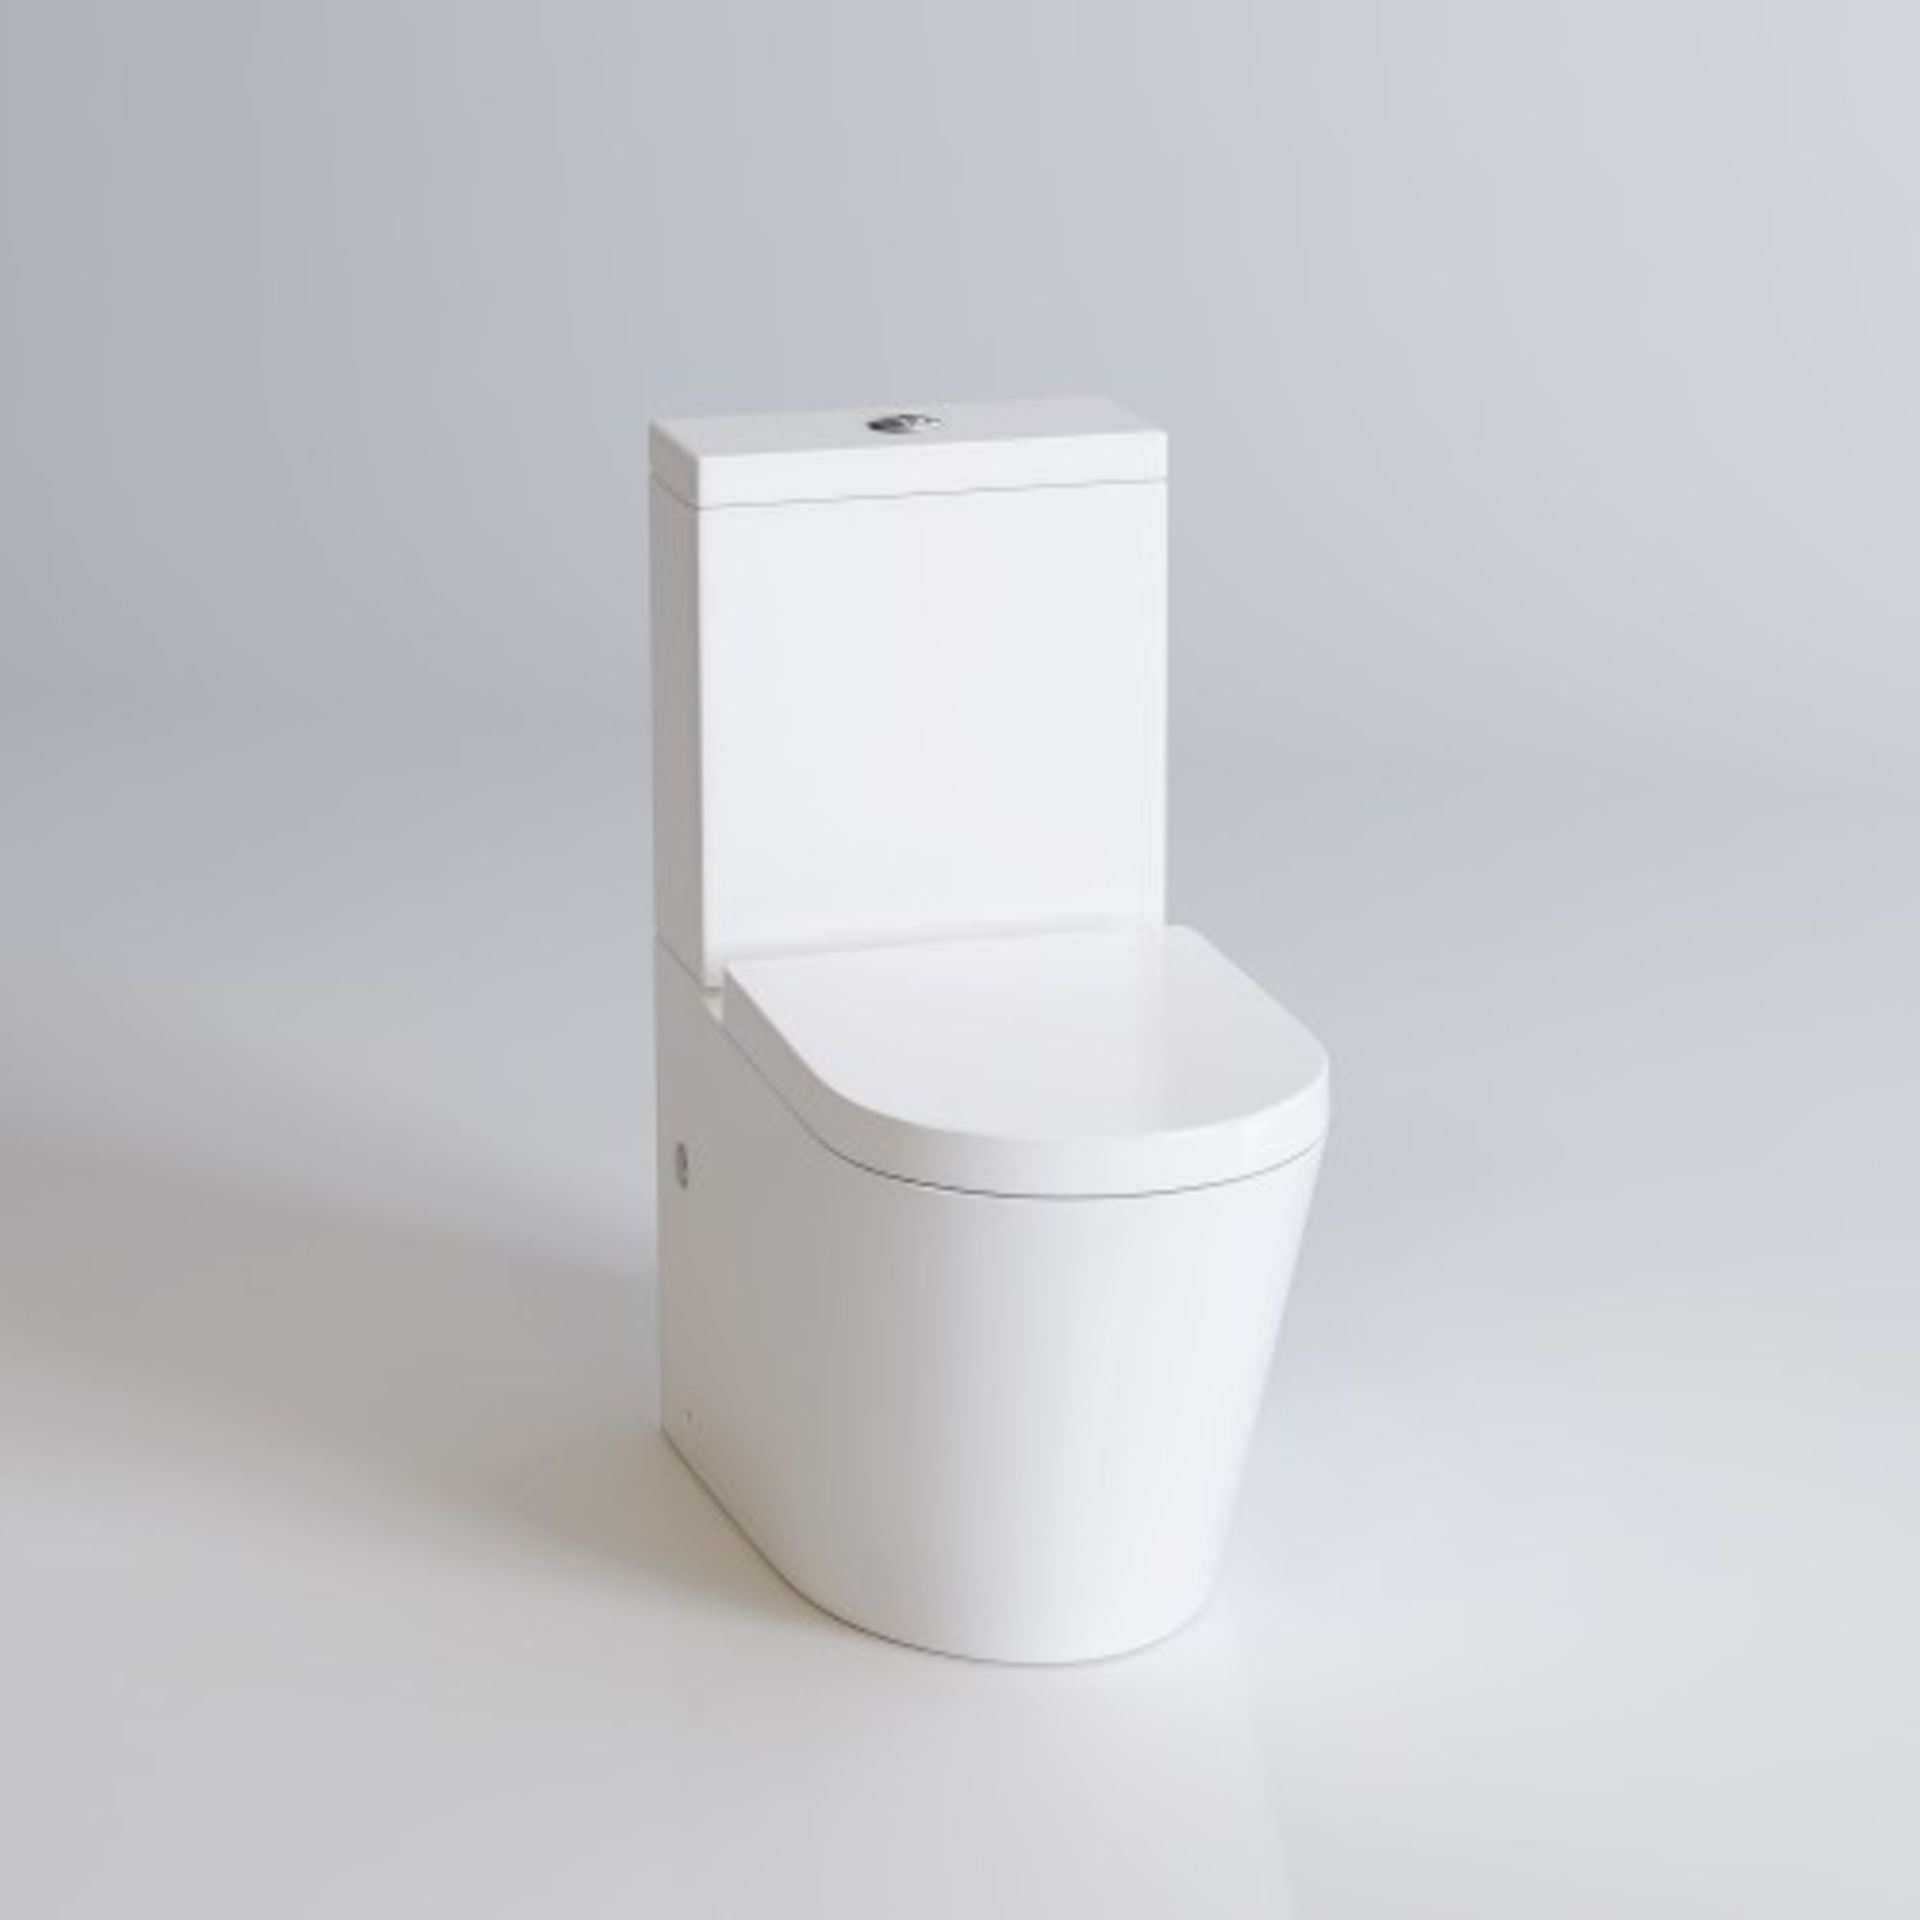 NEW Lyon II Close Coupled Toilet & Cistern inc Luxury Soft Close Seat. RRP £599.99.Lyon is a g... - Image 2 of 2